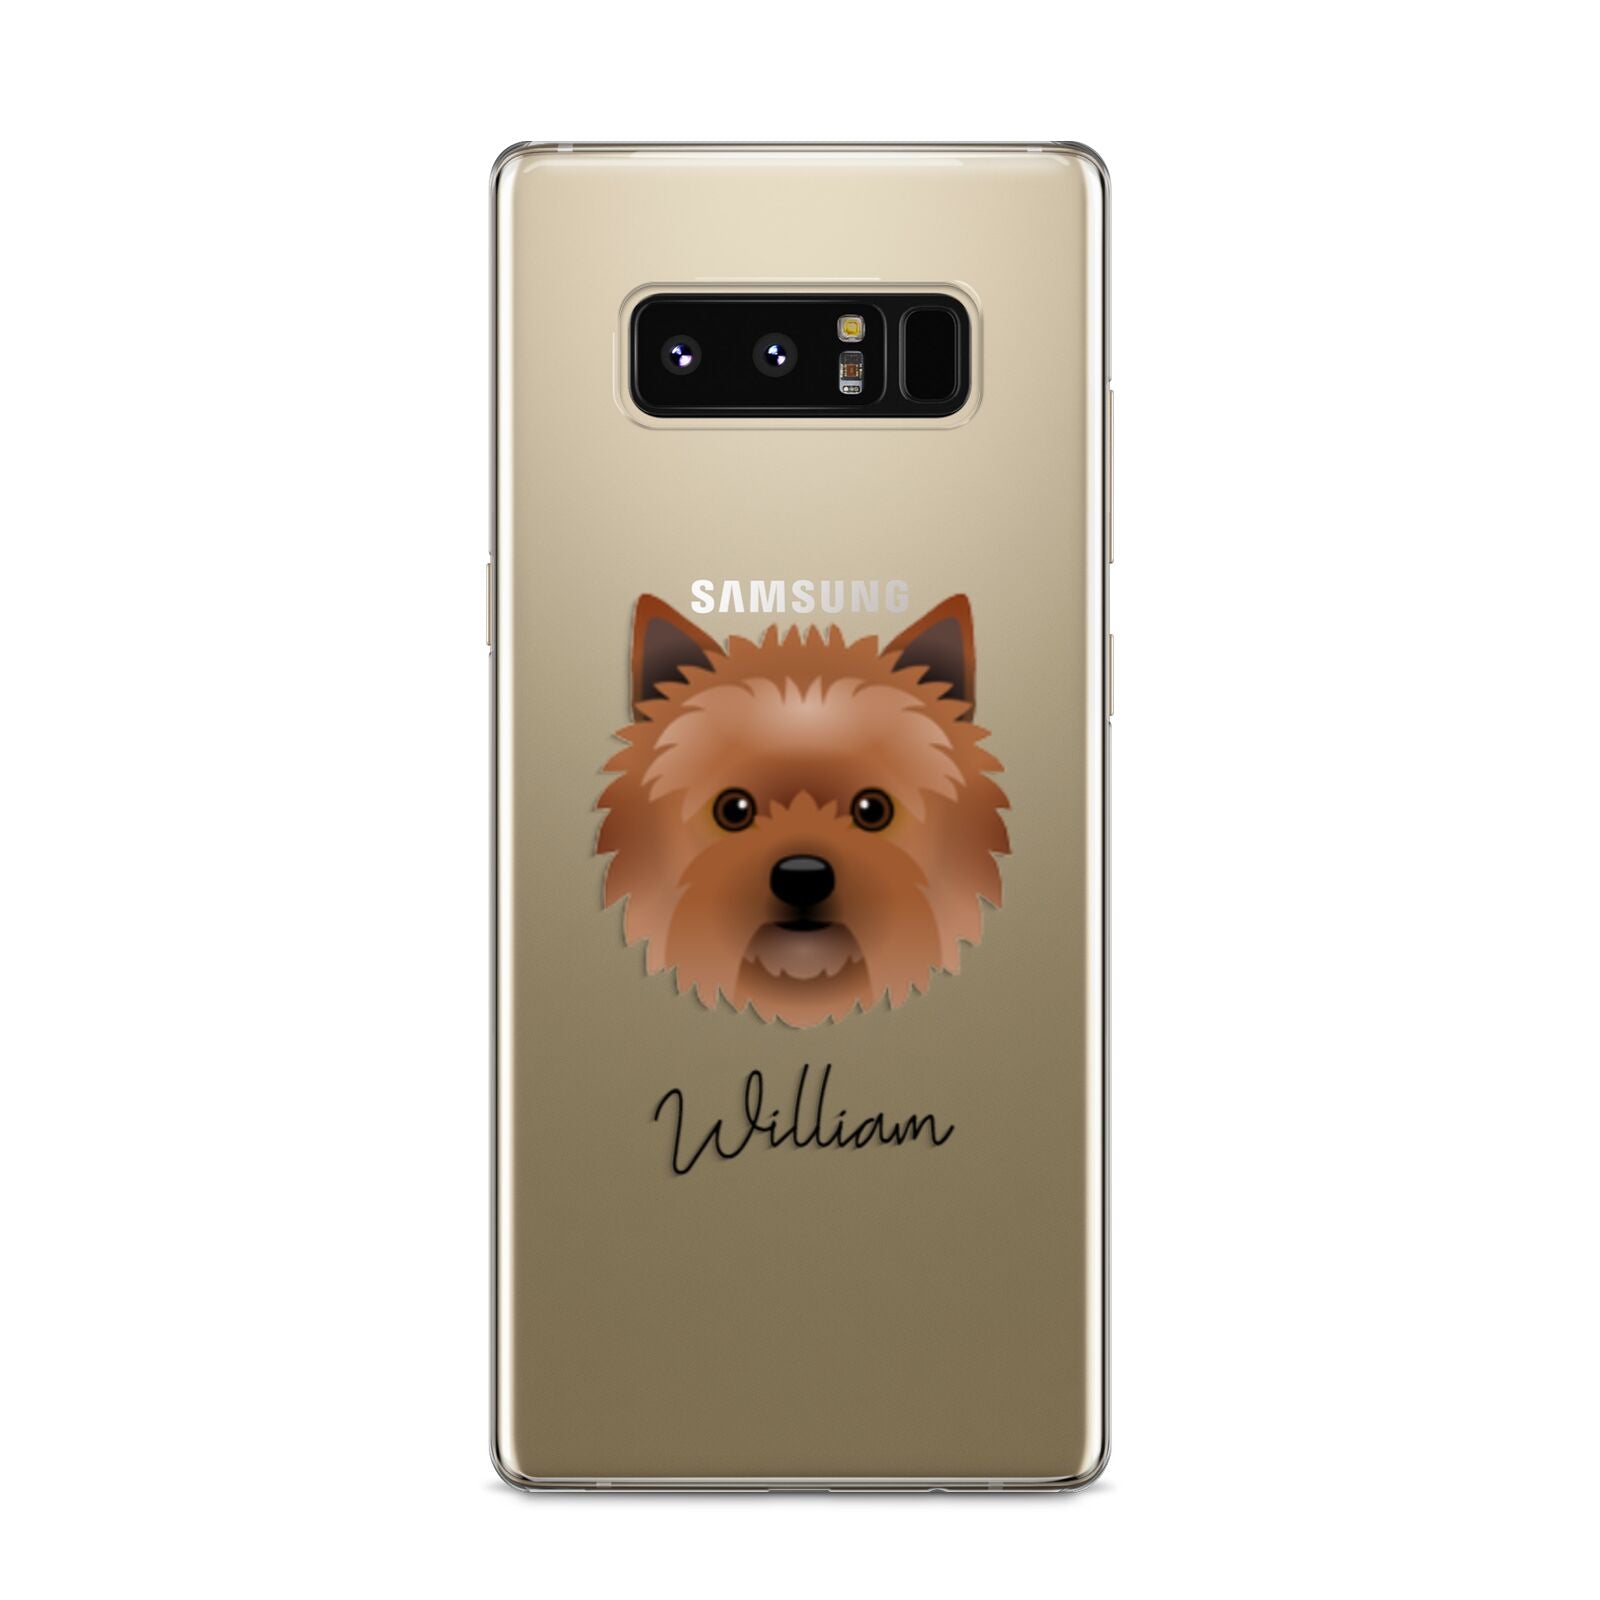 Cairn Terrier Personalised Samsung Galaxy S8 Case